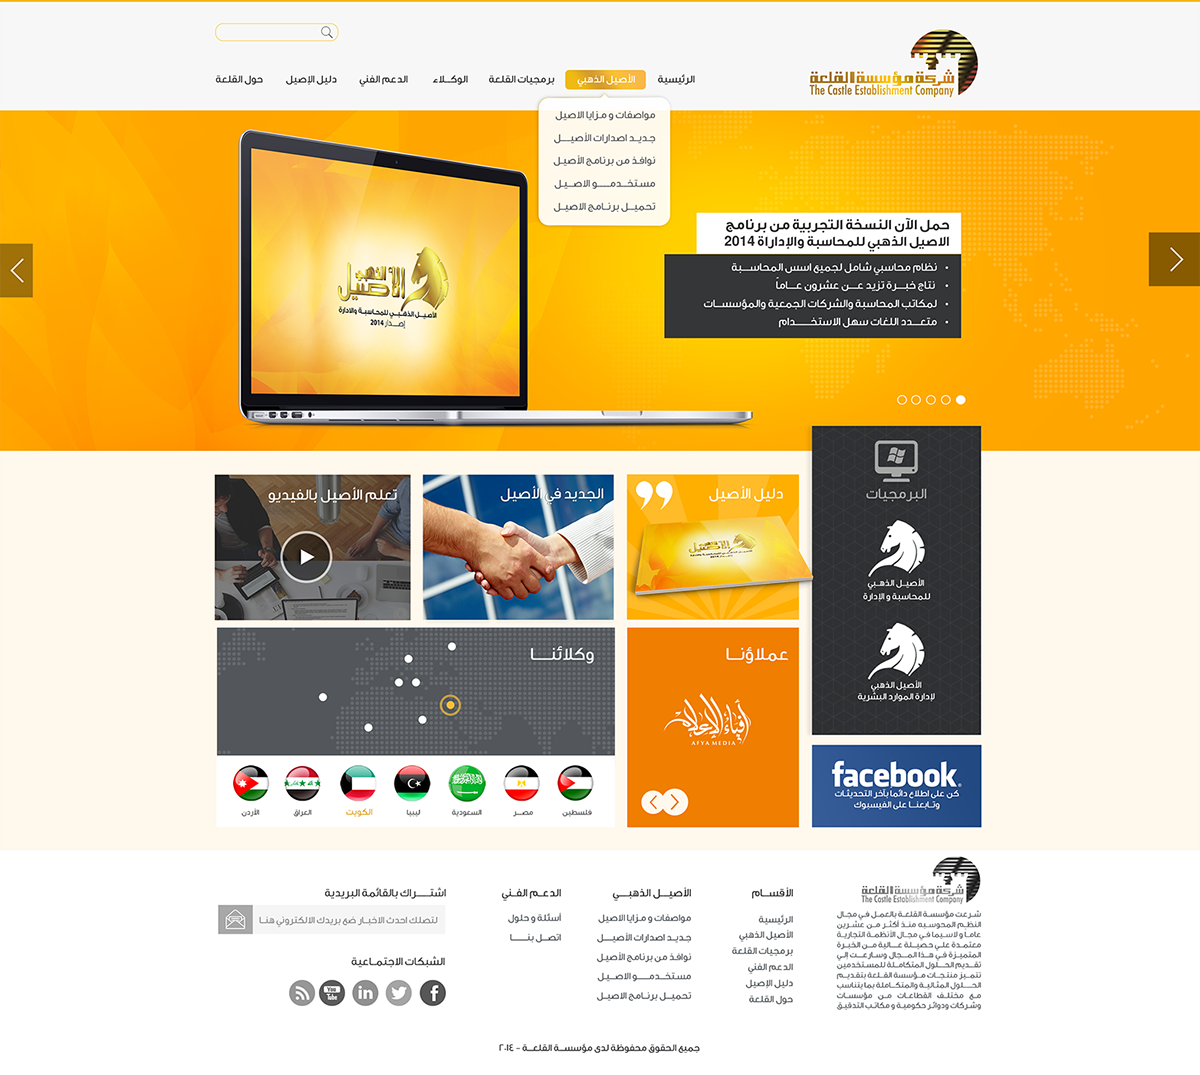 gaza golden castle Alaseel aseel accounting accountant administration administrative solution web system website design web ui ux UI/UX